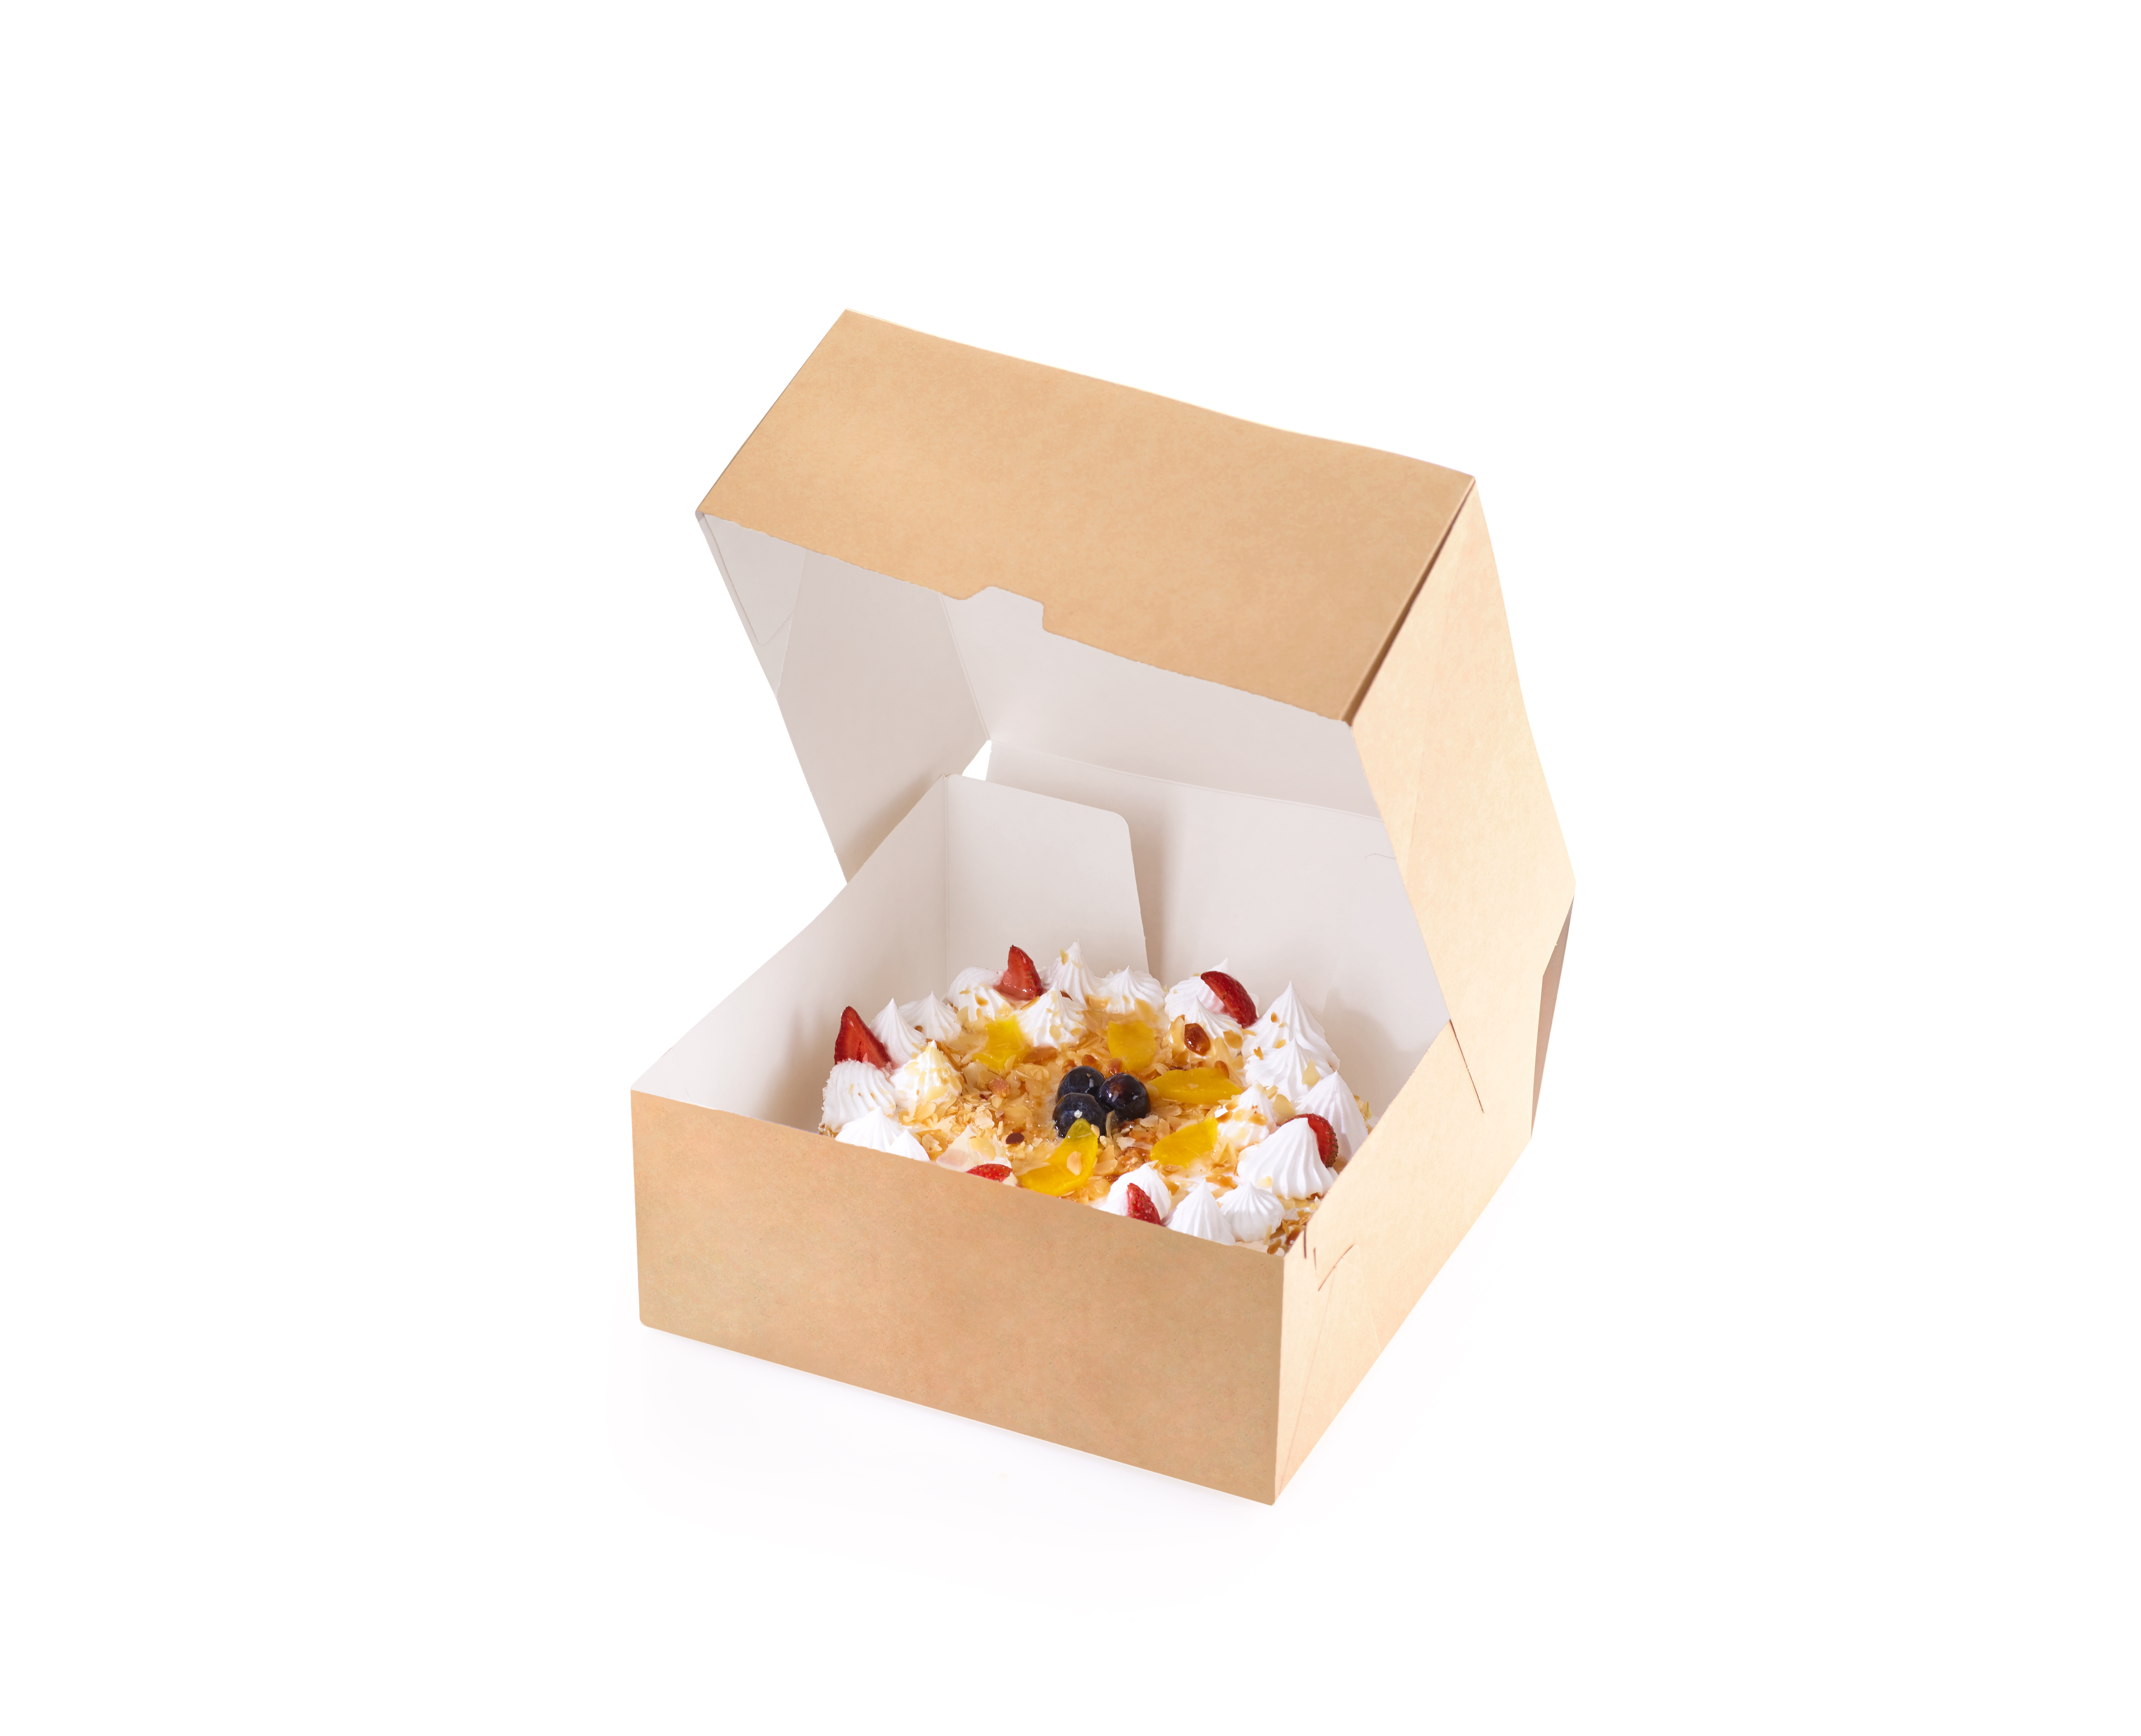 OSQ CAKE 6000 packaging for desserts